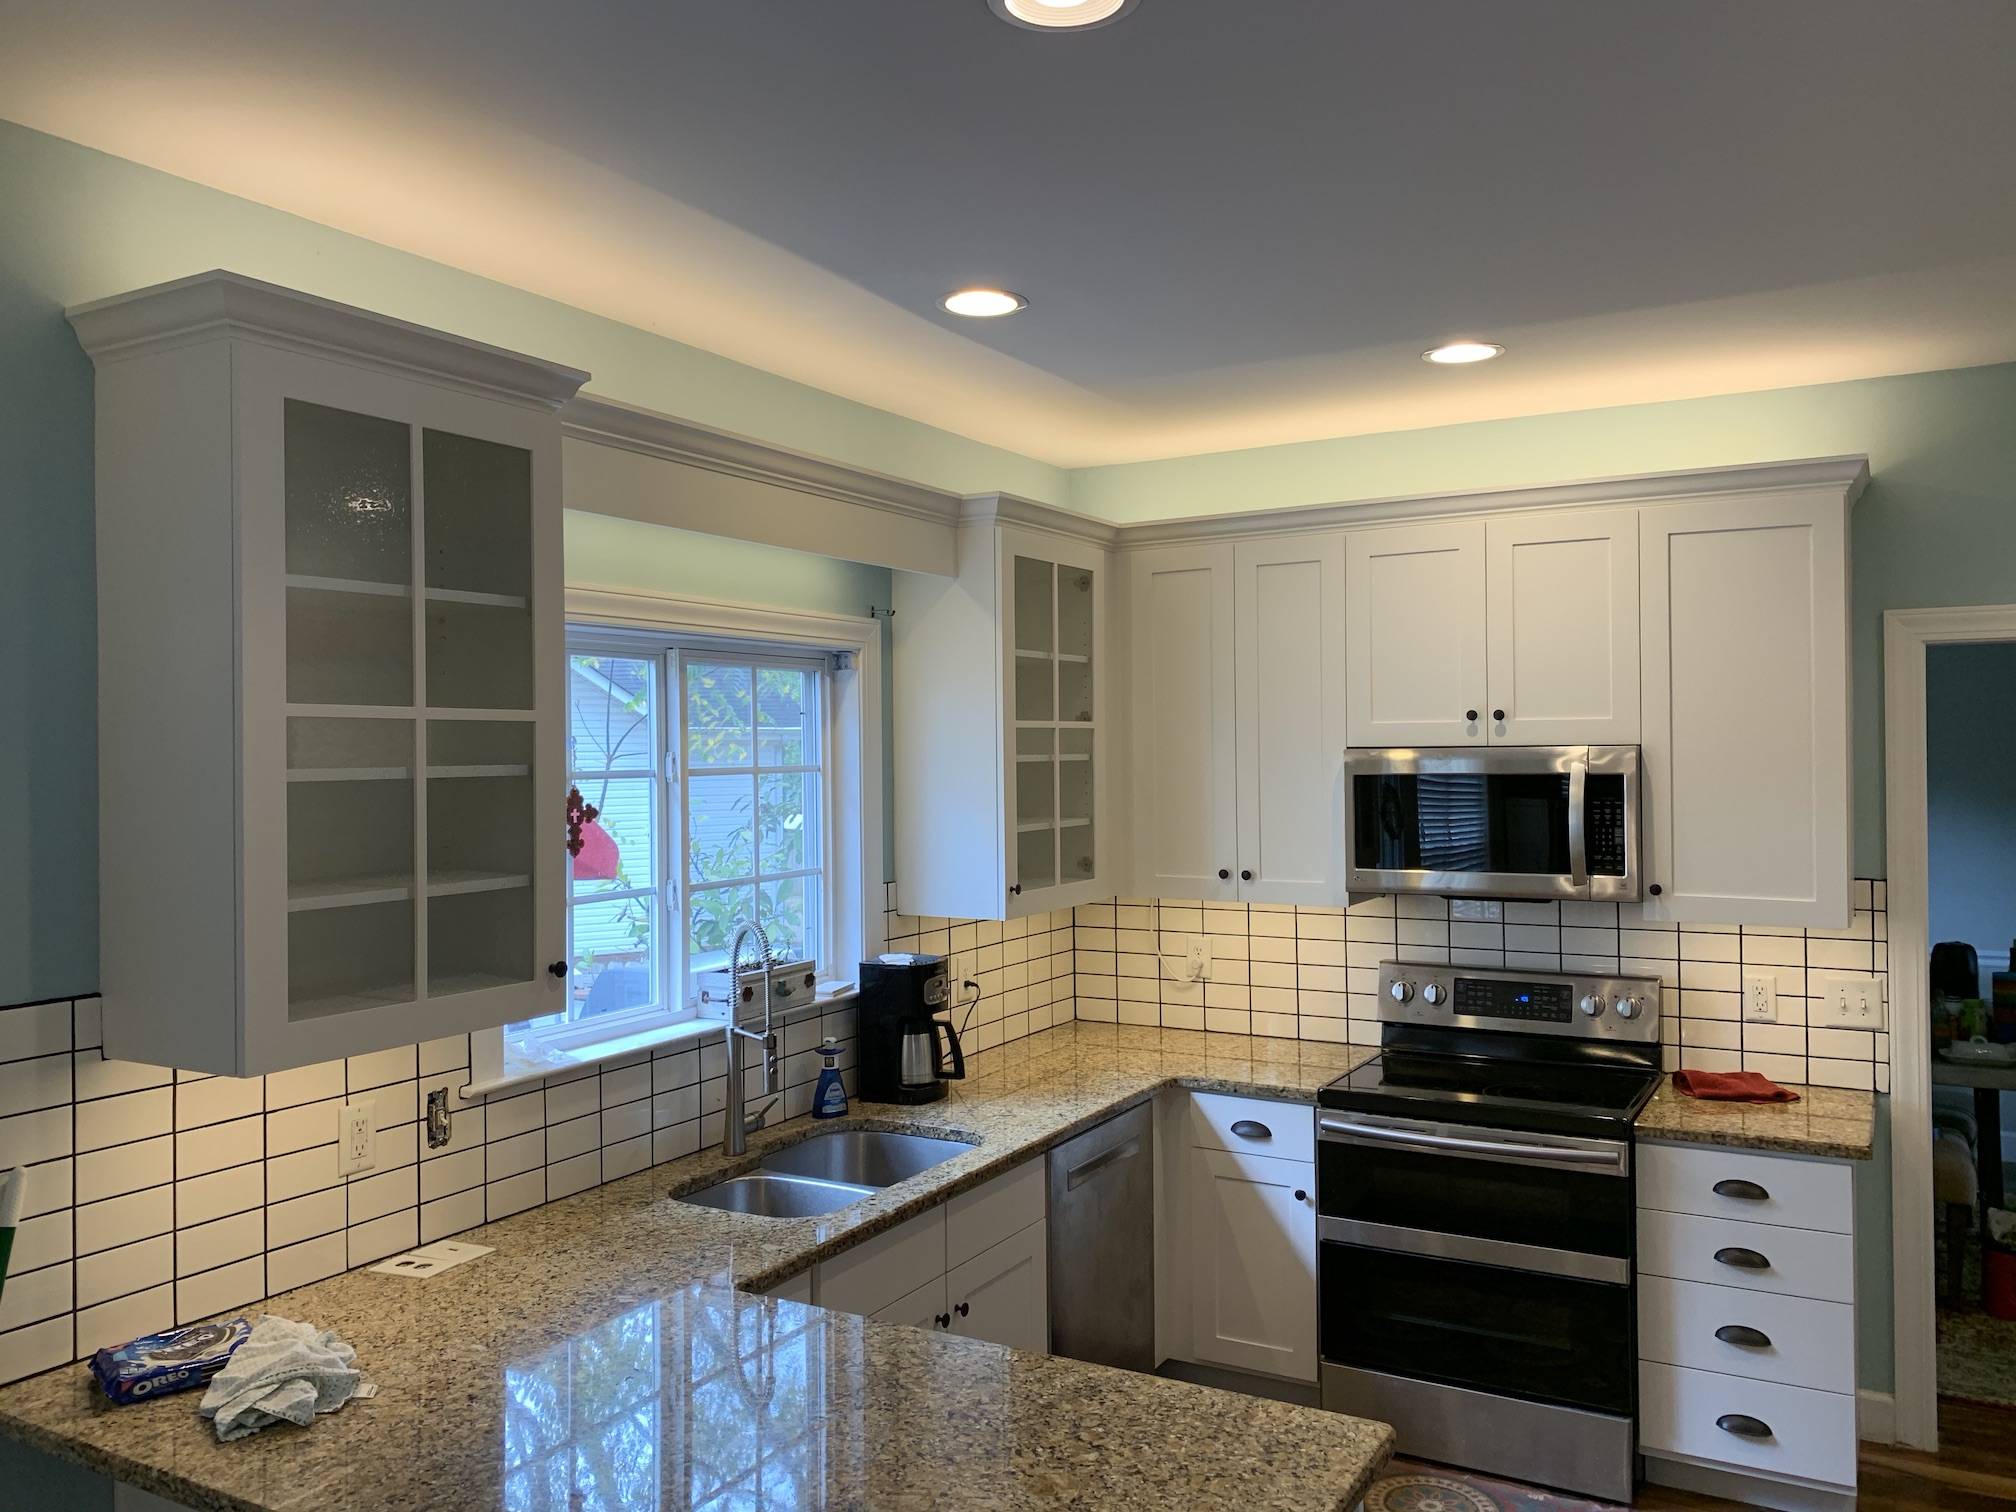 Best LED strip lights for kitchen under cabinets and above cabinets